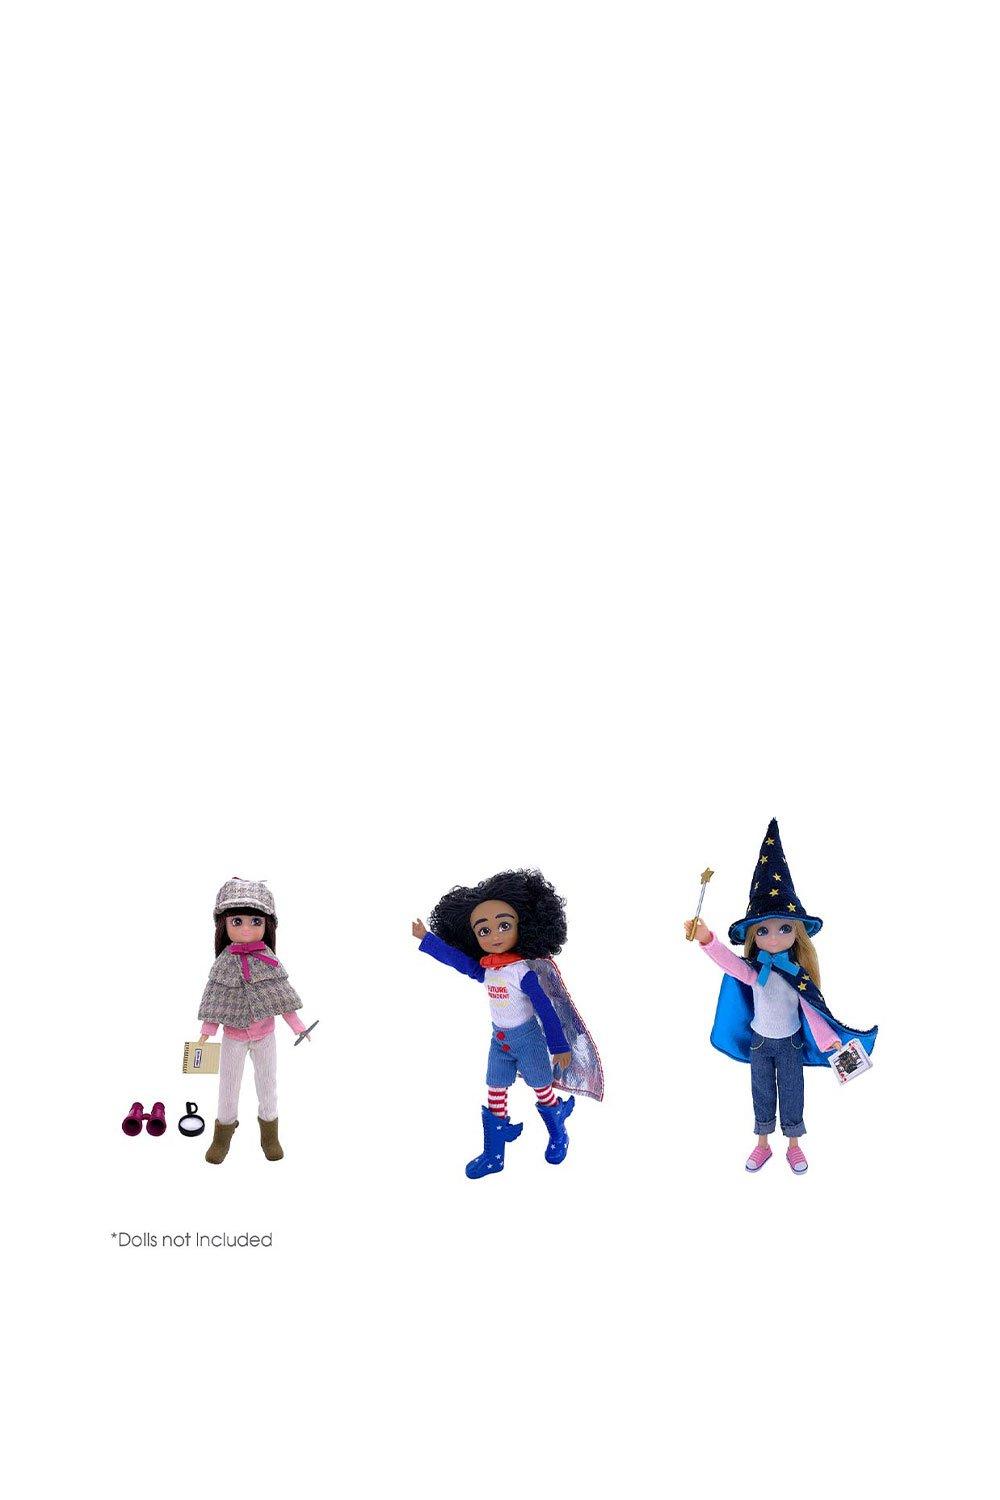 Three Dress Up Party Dolls Outfits